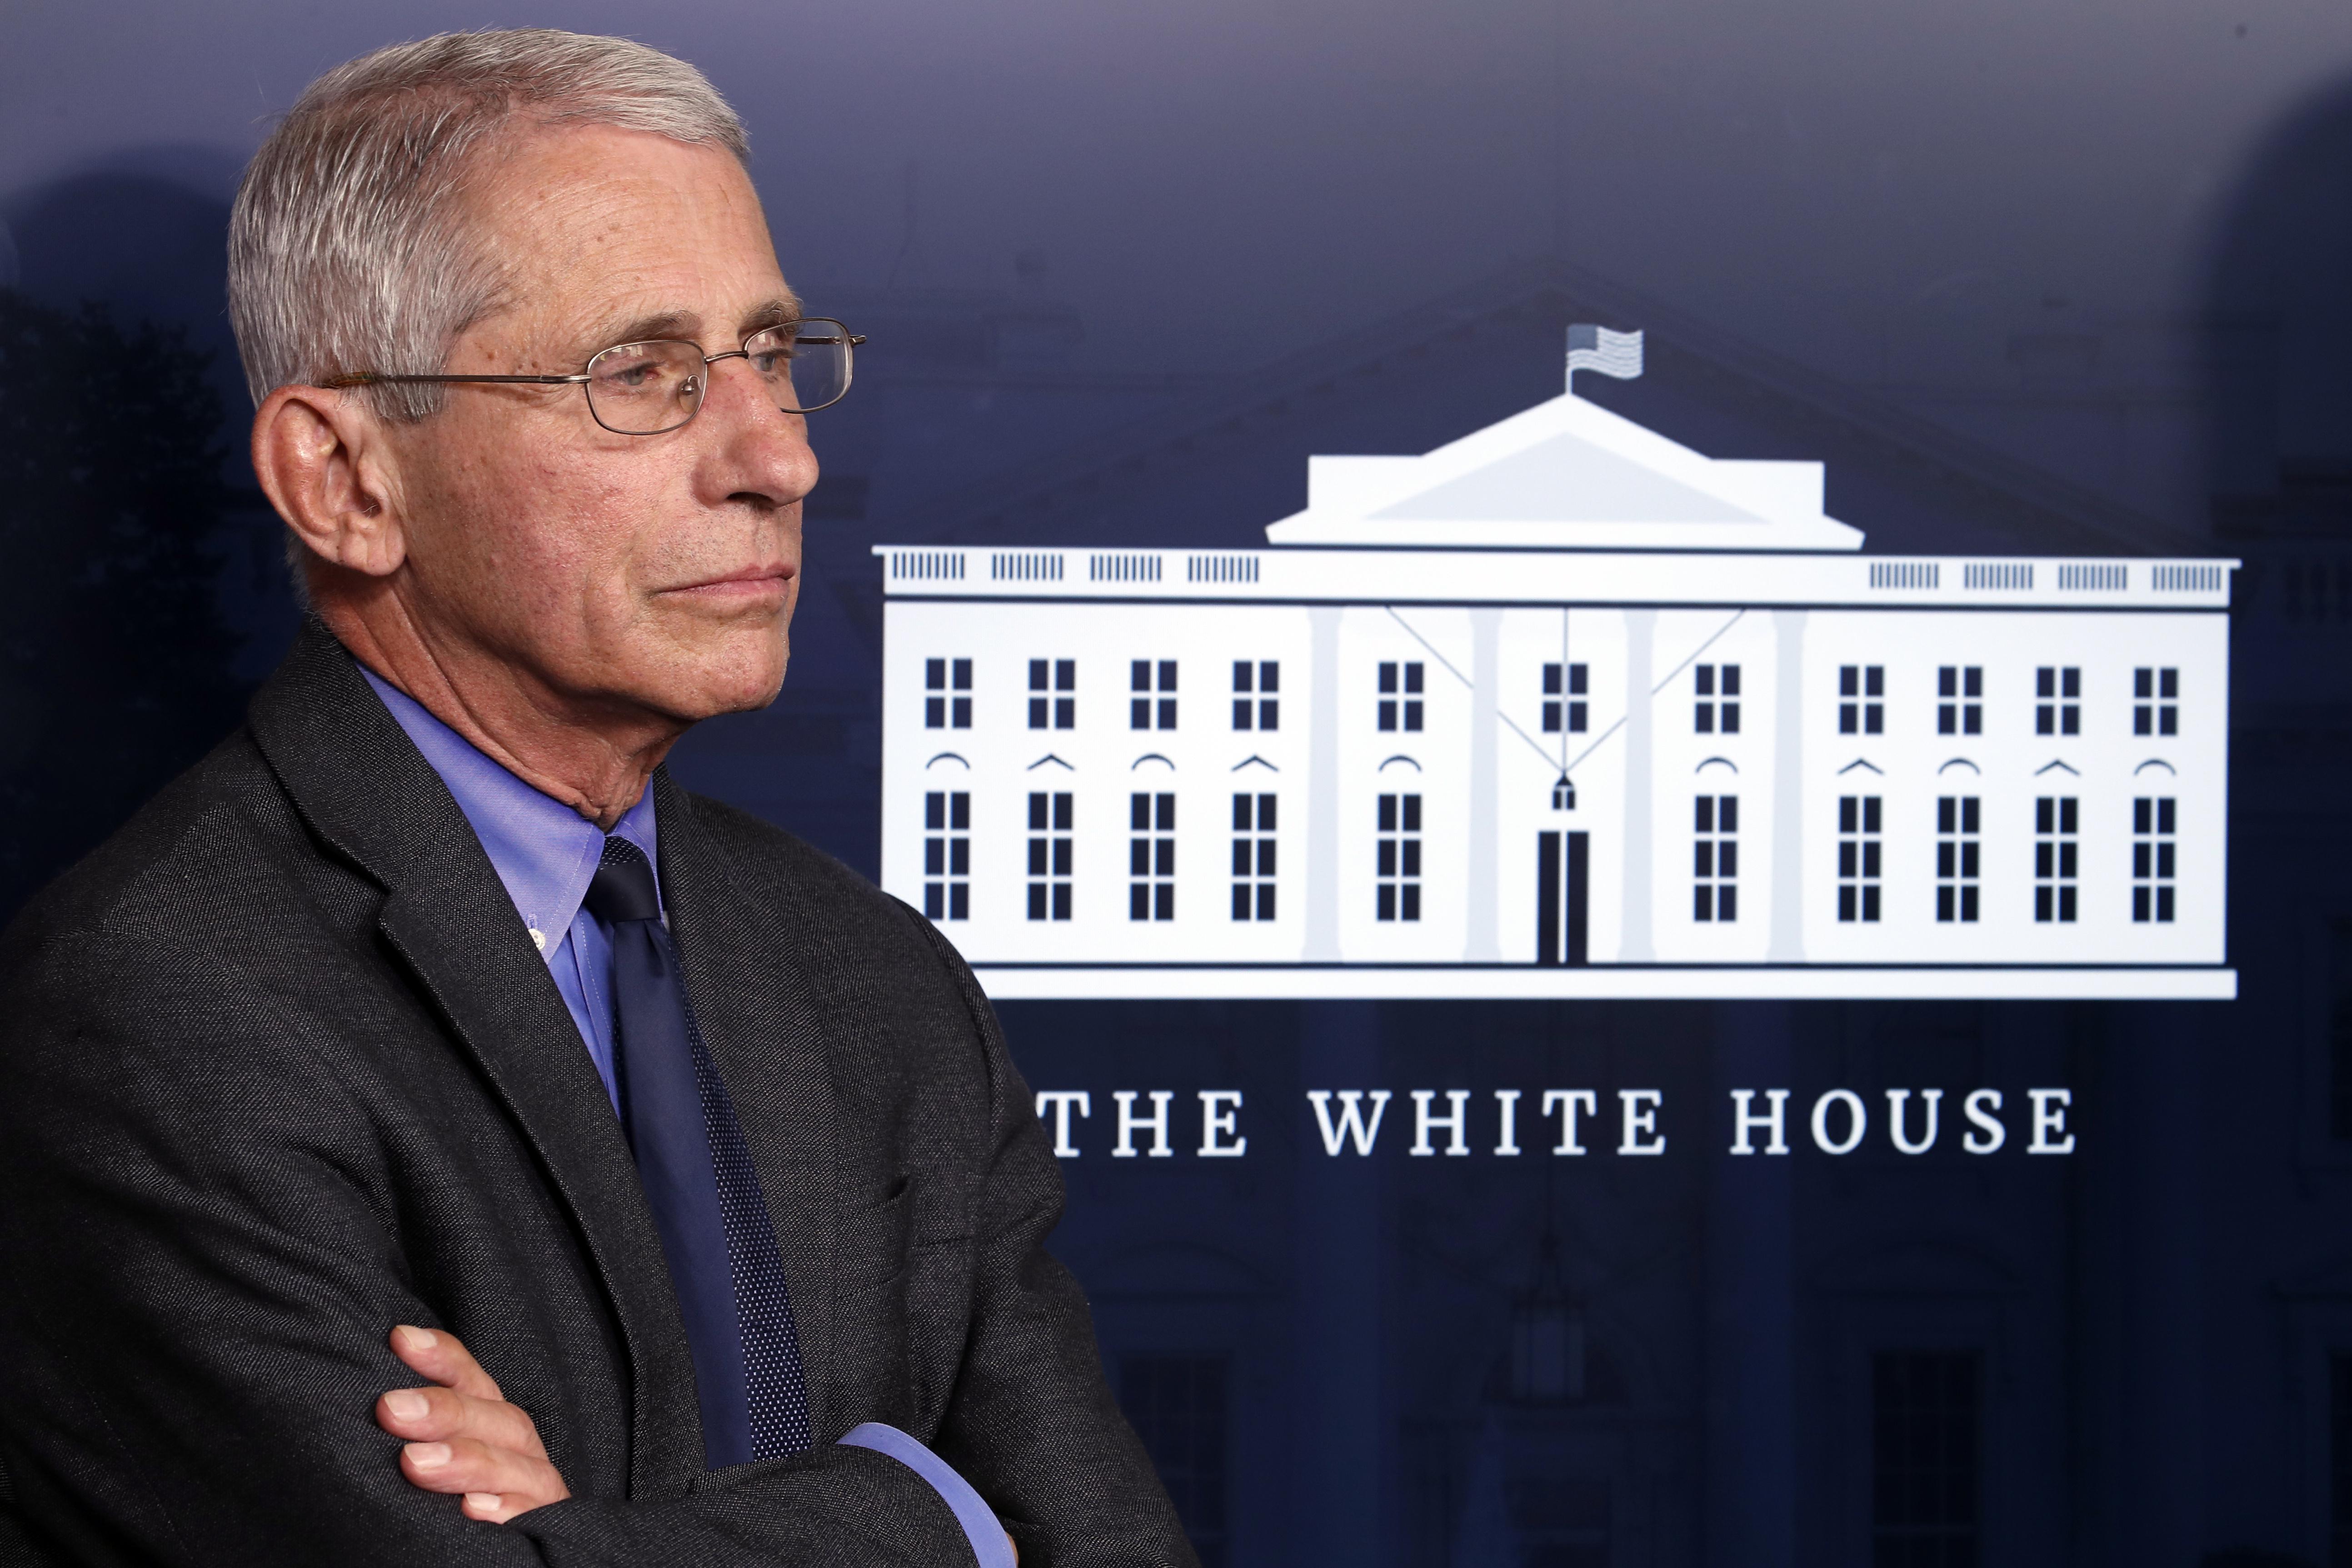 Dr. Anthony Fauci, director of the National Institute of Allergy and Infectious Diseases, listens during a briefing about the coronavirus at the White House on April 7.